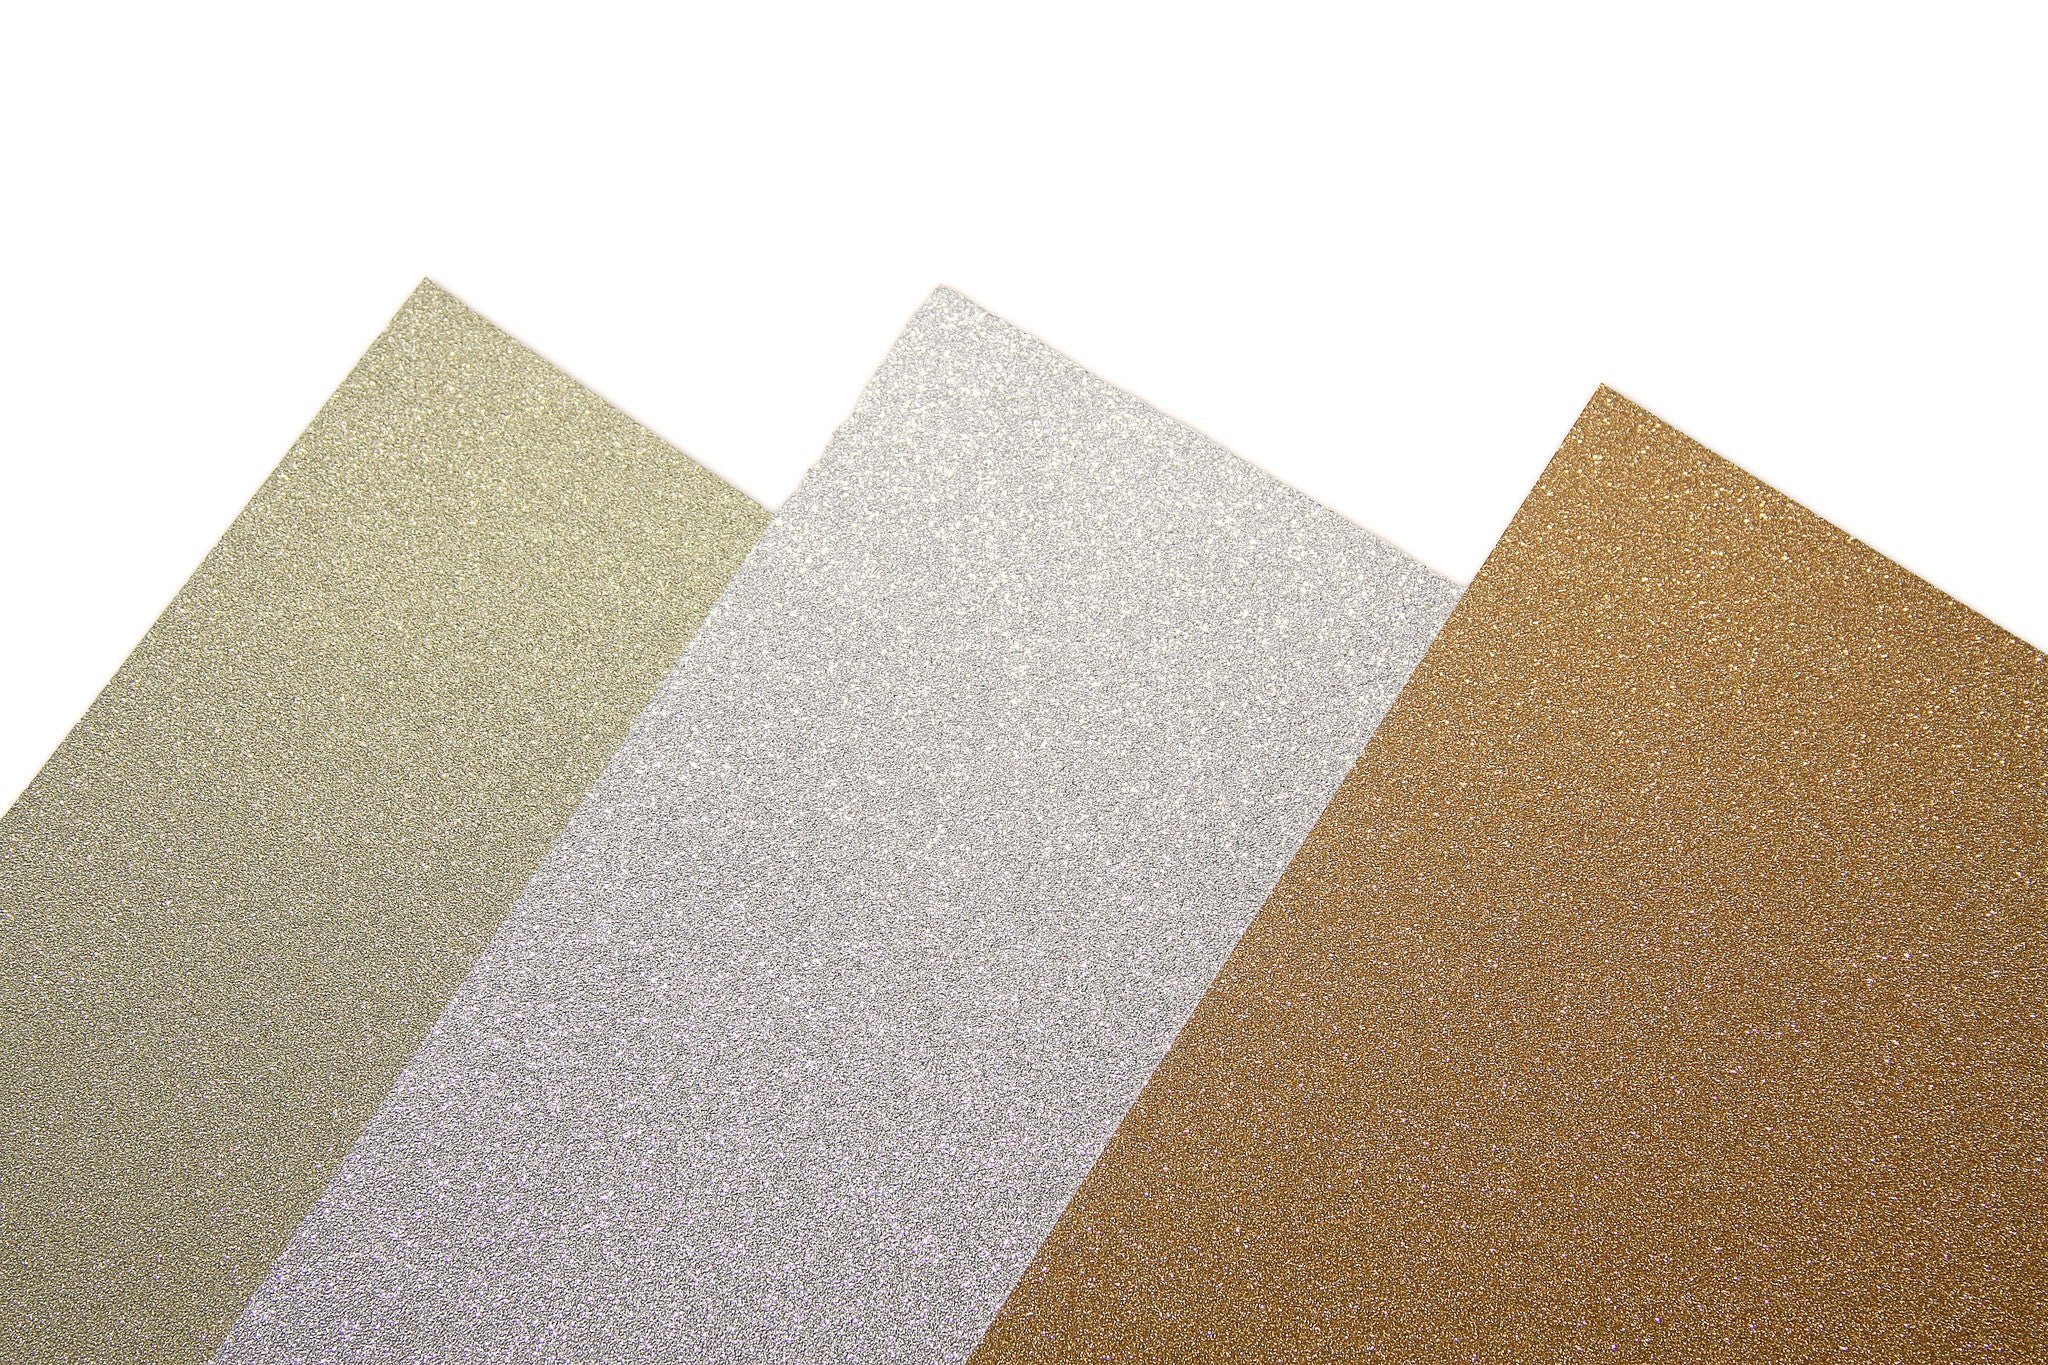 SANZIX Glitter Cardstock Paper 110lb. 300 GSM - 30 Sheets - 3 Colors - 12x12 Inches Heavyweight Glitter Paper, Cardstock for Cricut